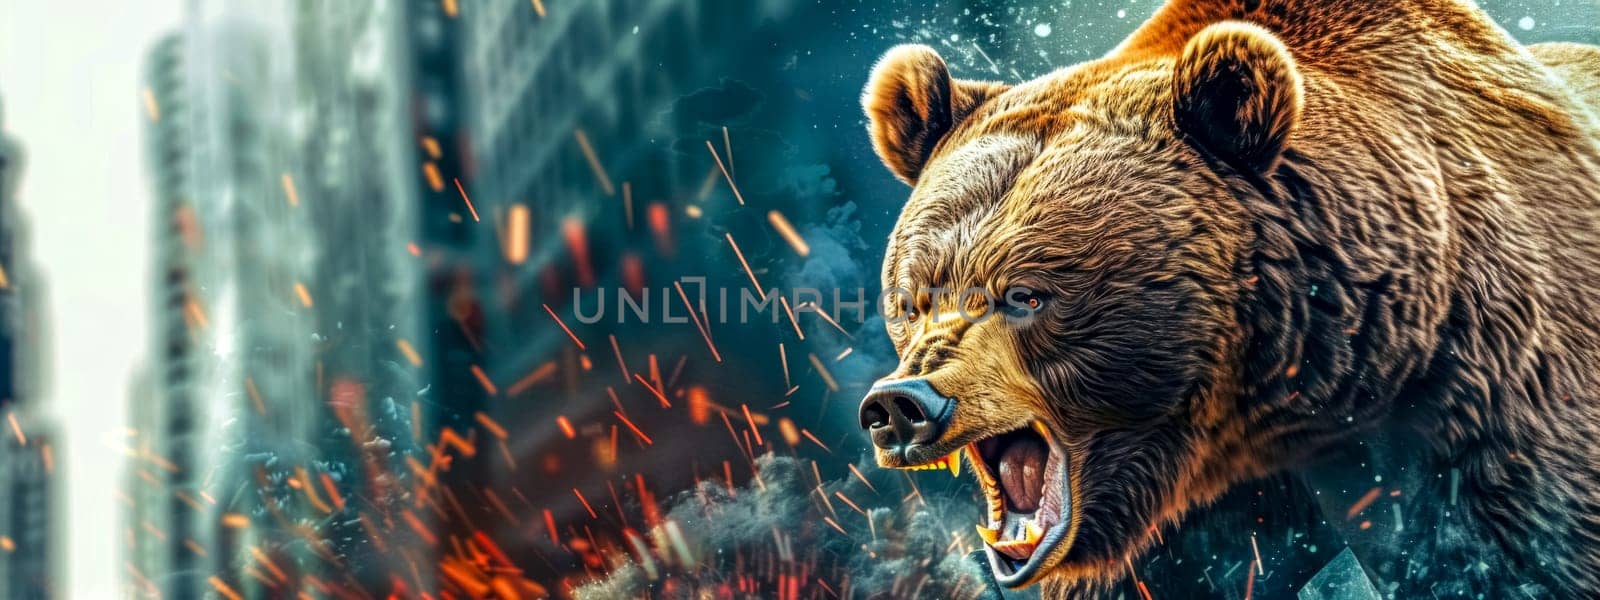 Captivating image of an enraged bear with sparks flying around it